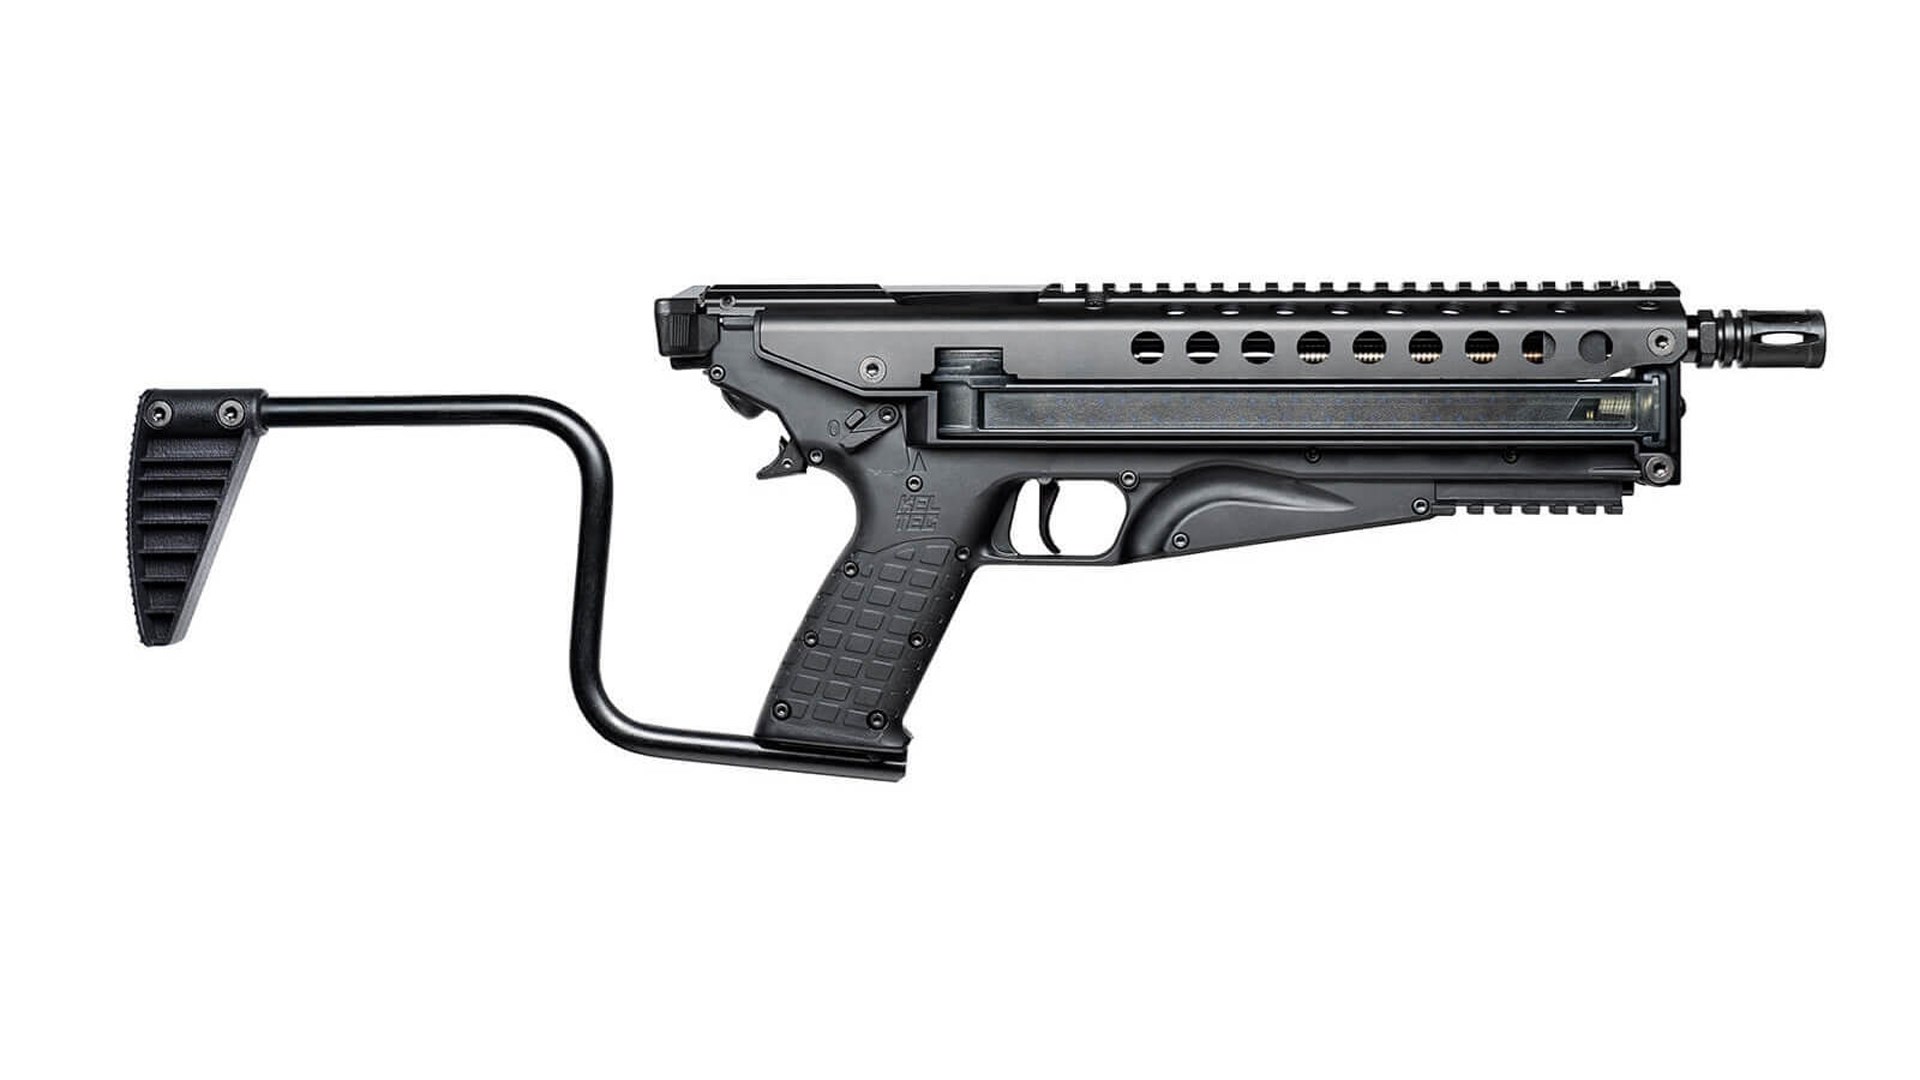 Right side of the KelTec R50 Defender.